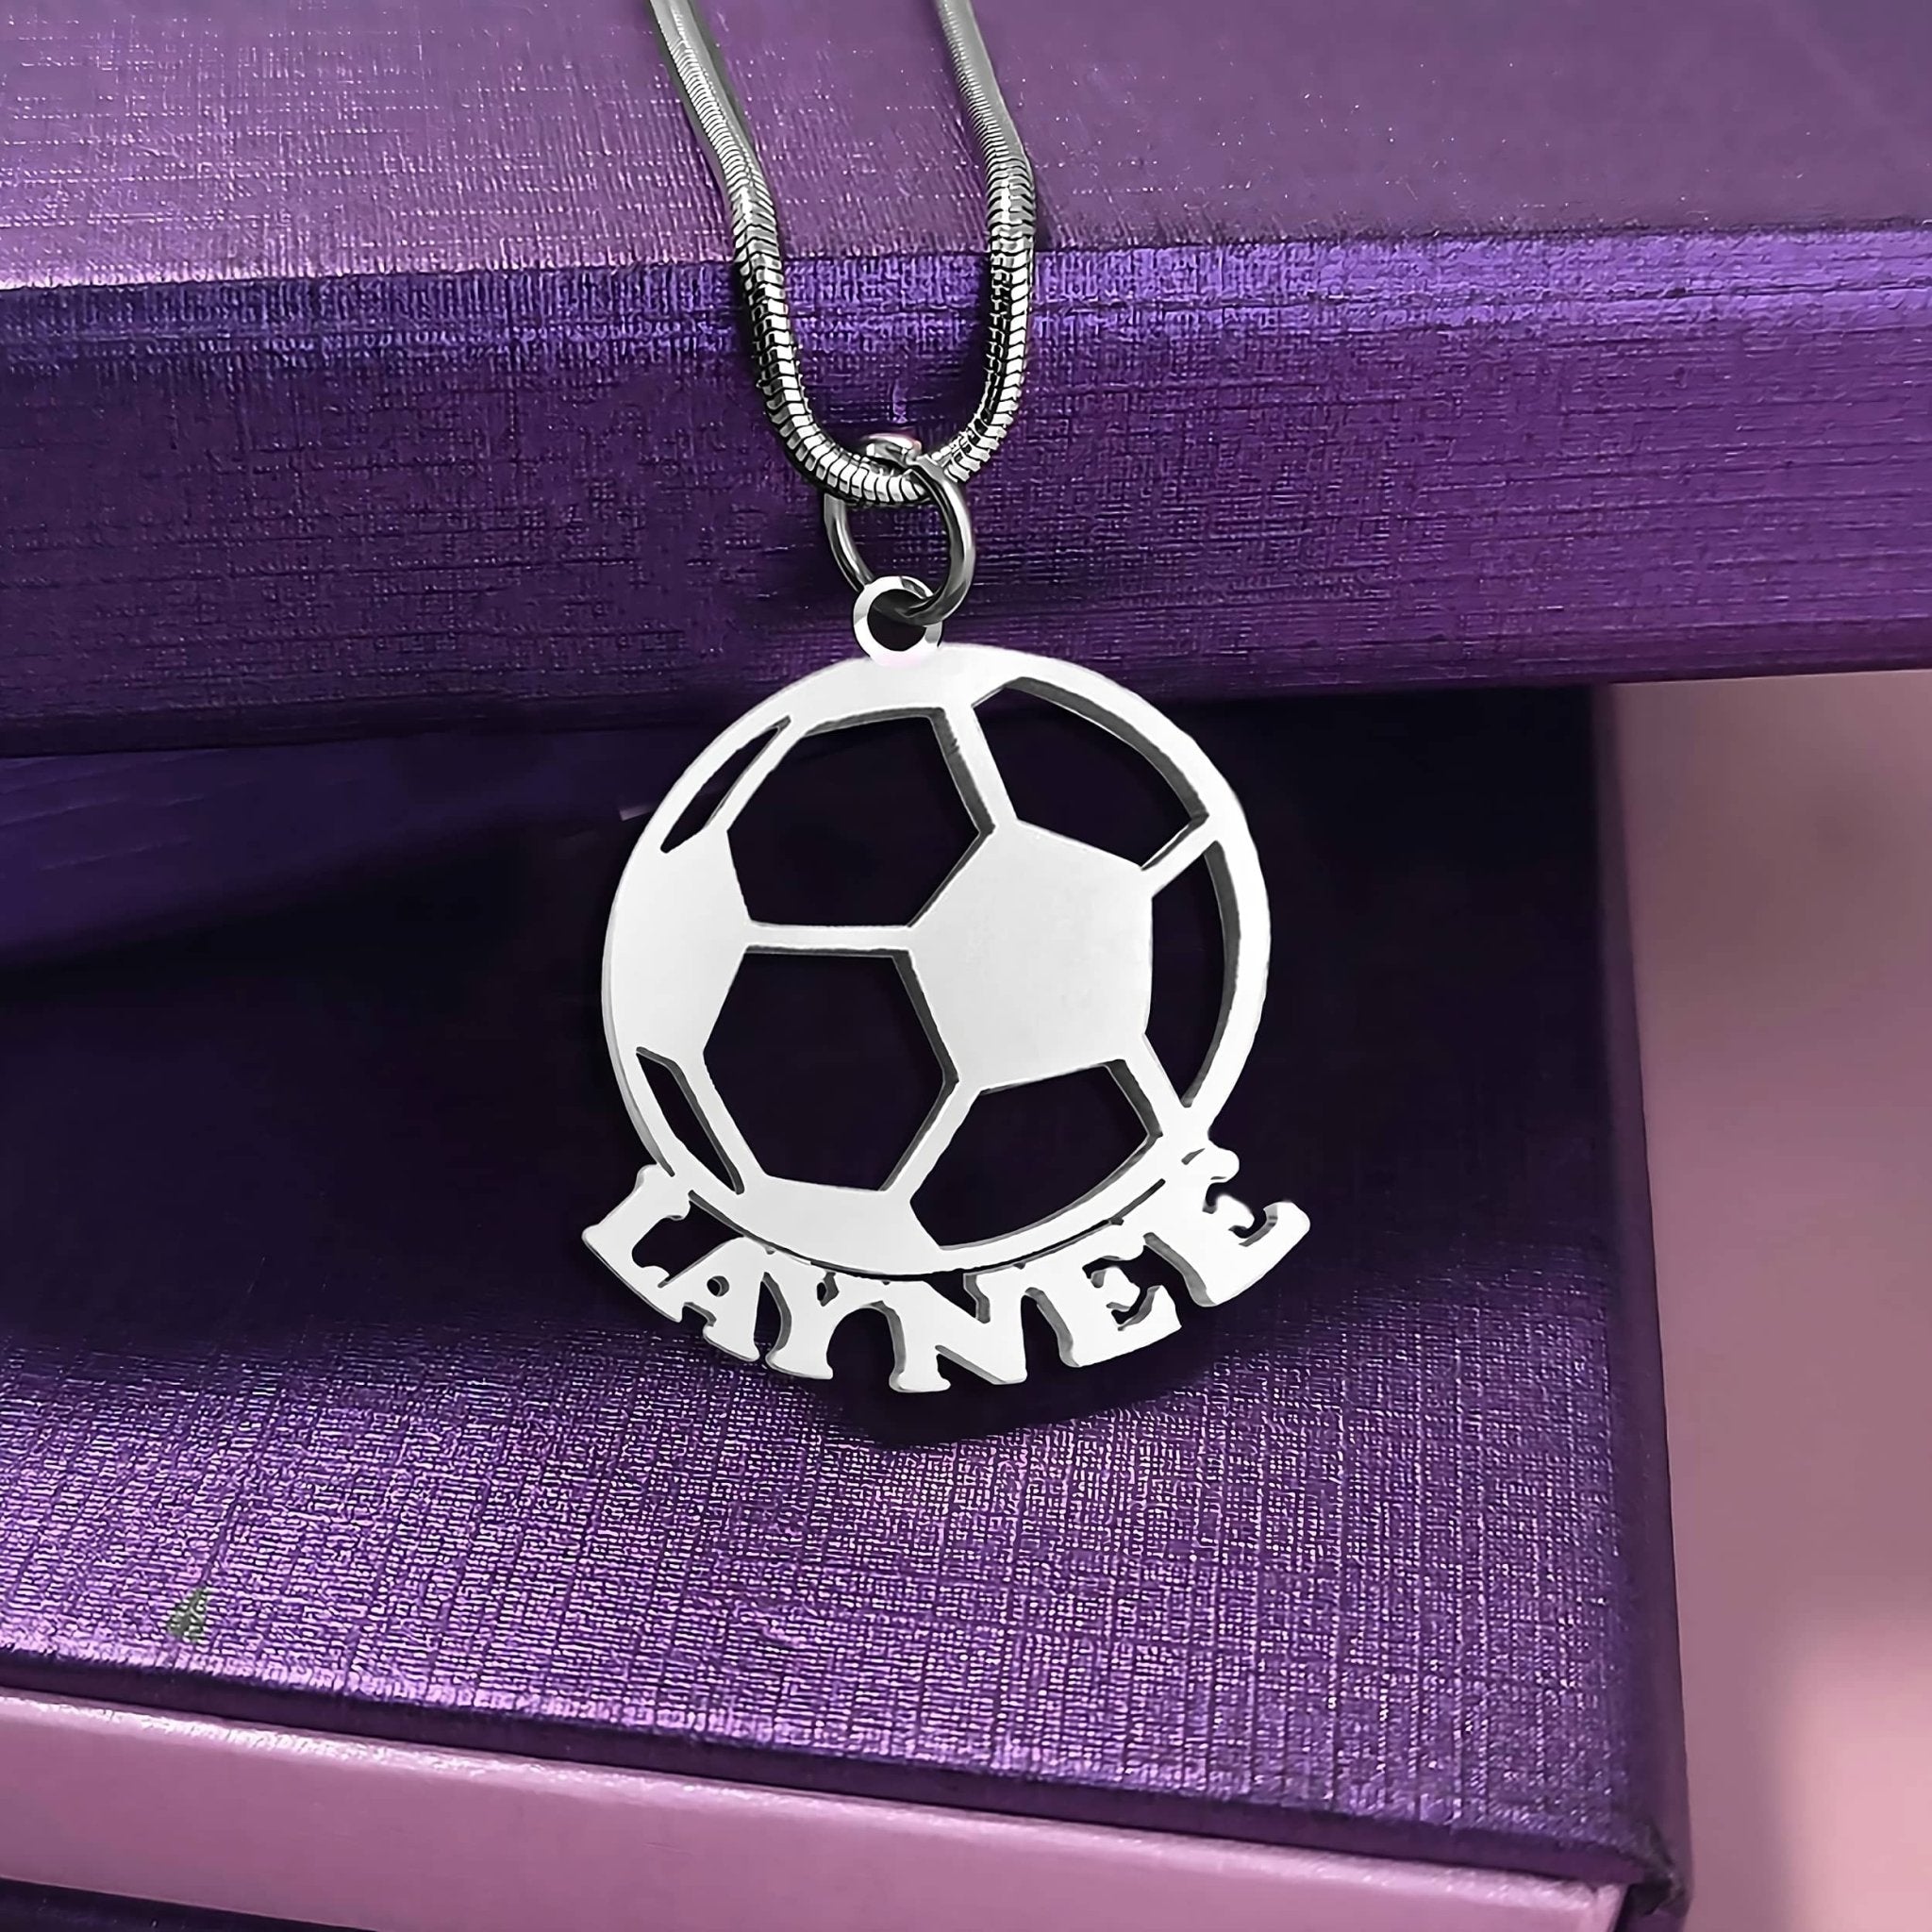 Soccerball Name Necklace - Name Necklaces by Belle Fever